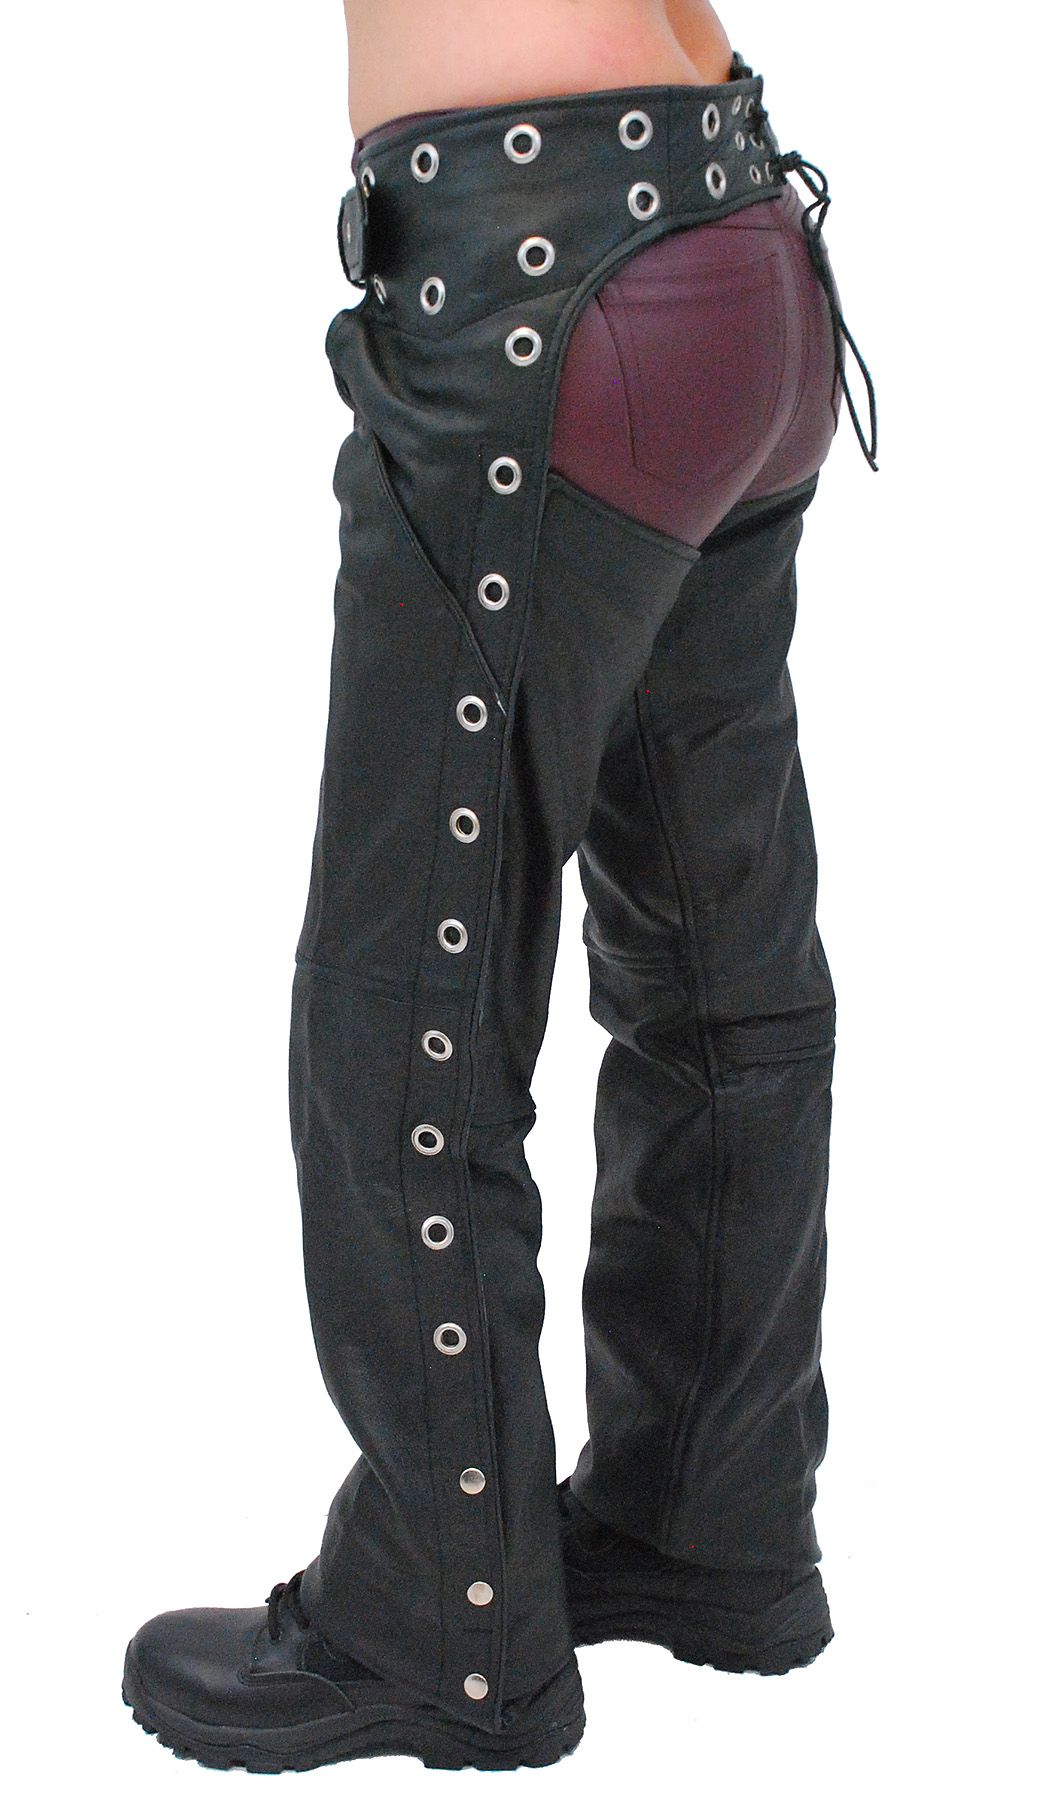 lady biker wearing cheap chaps with grommets in them